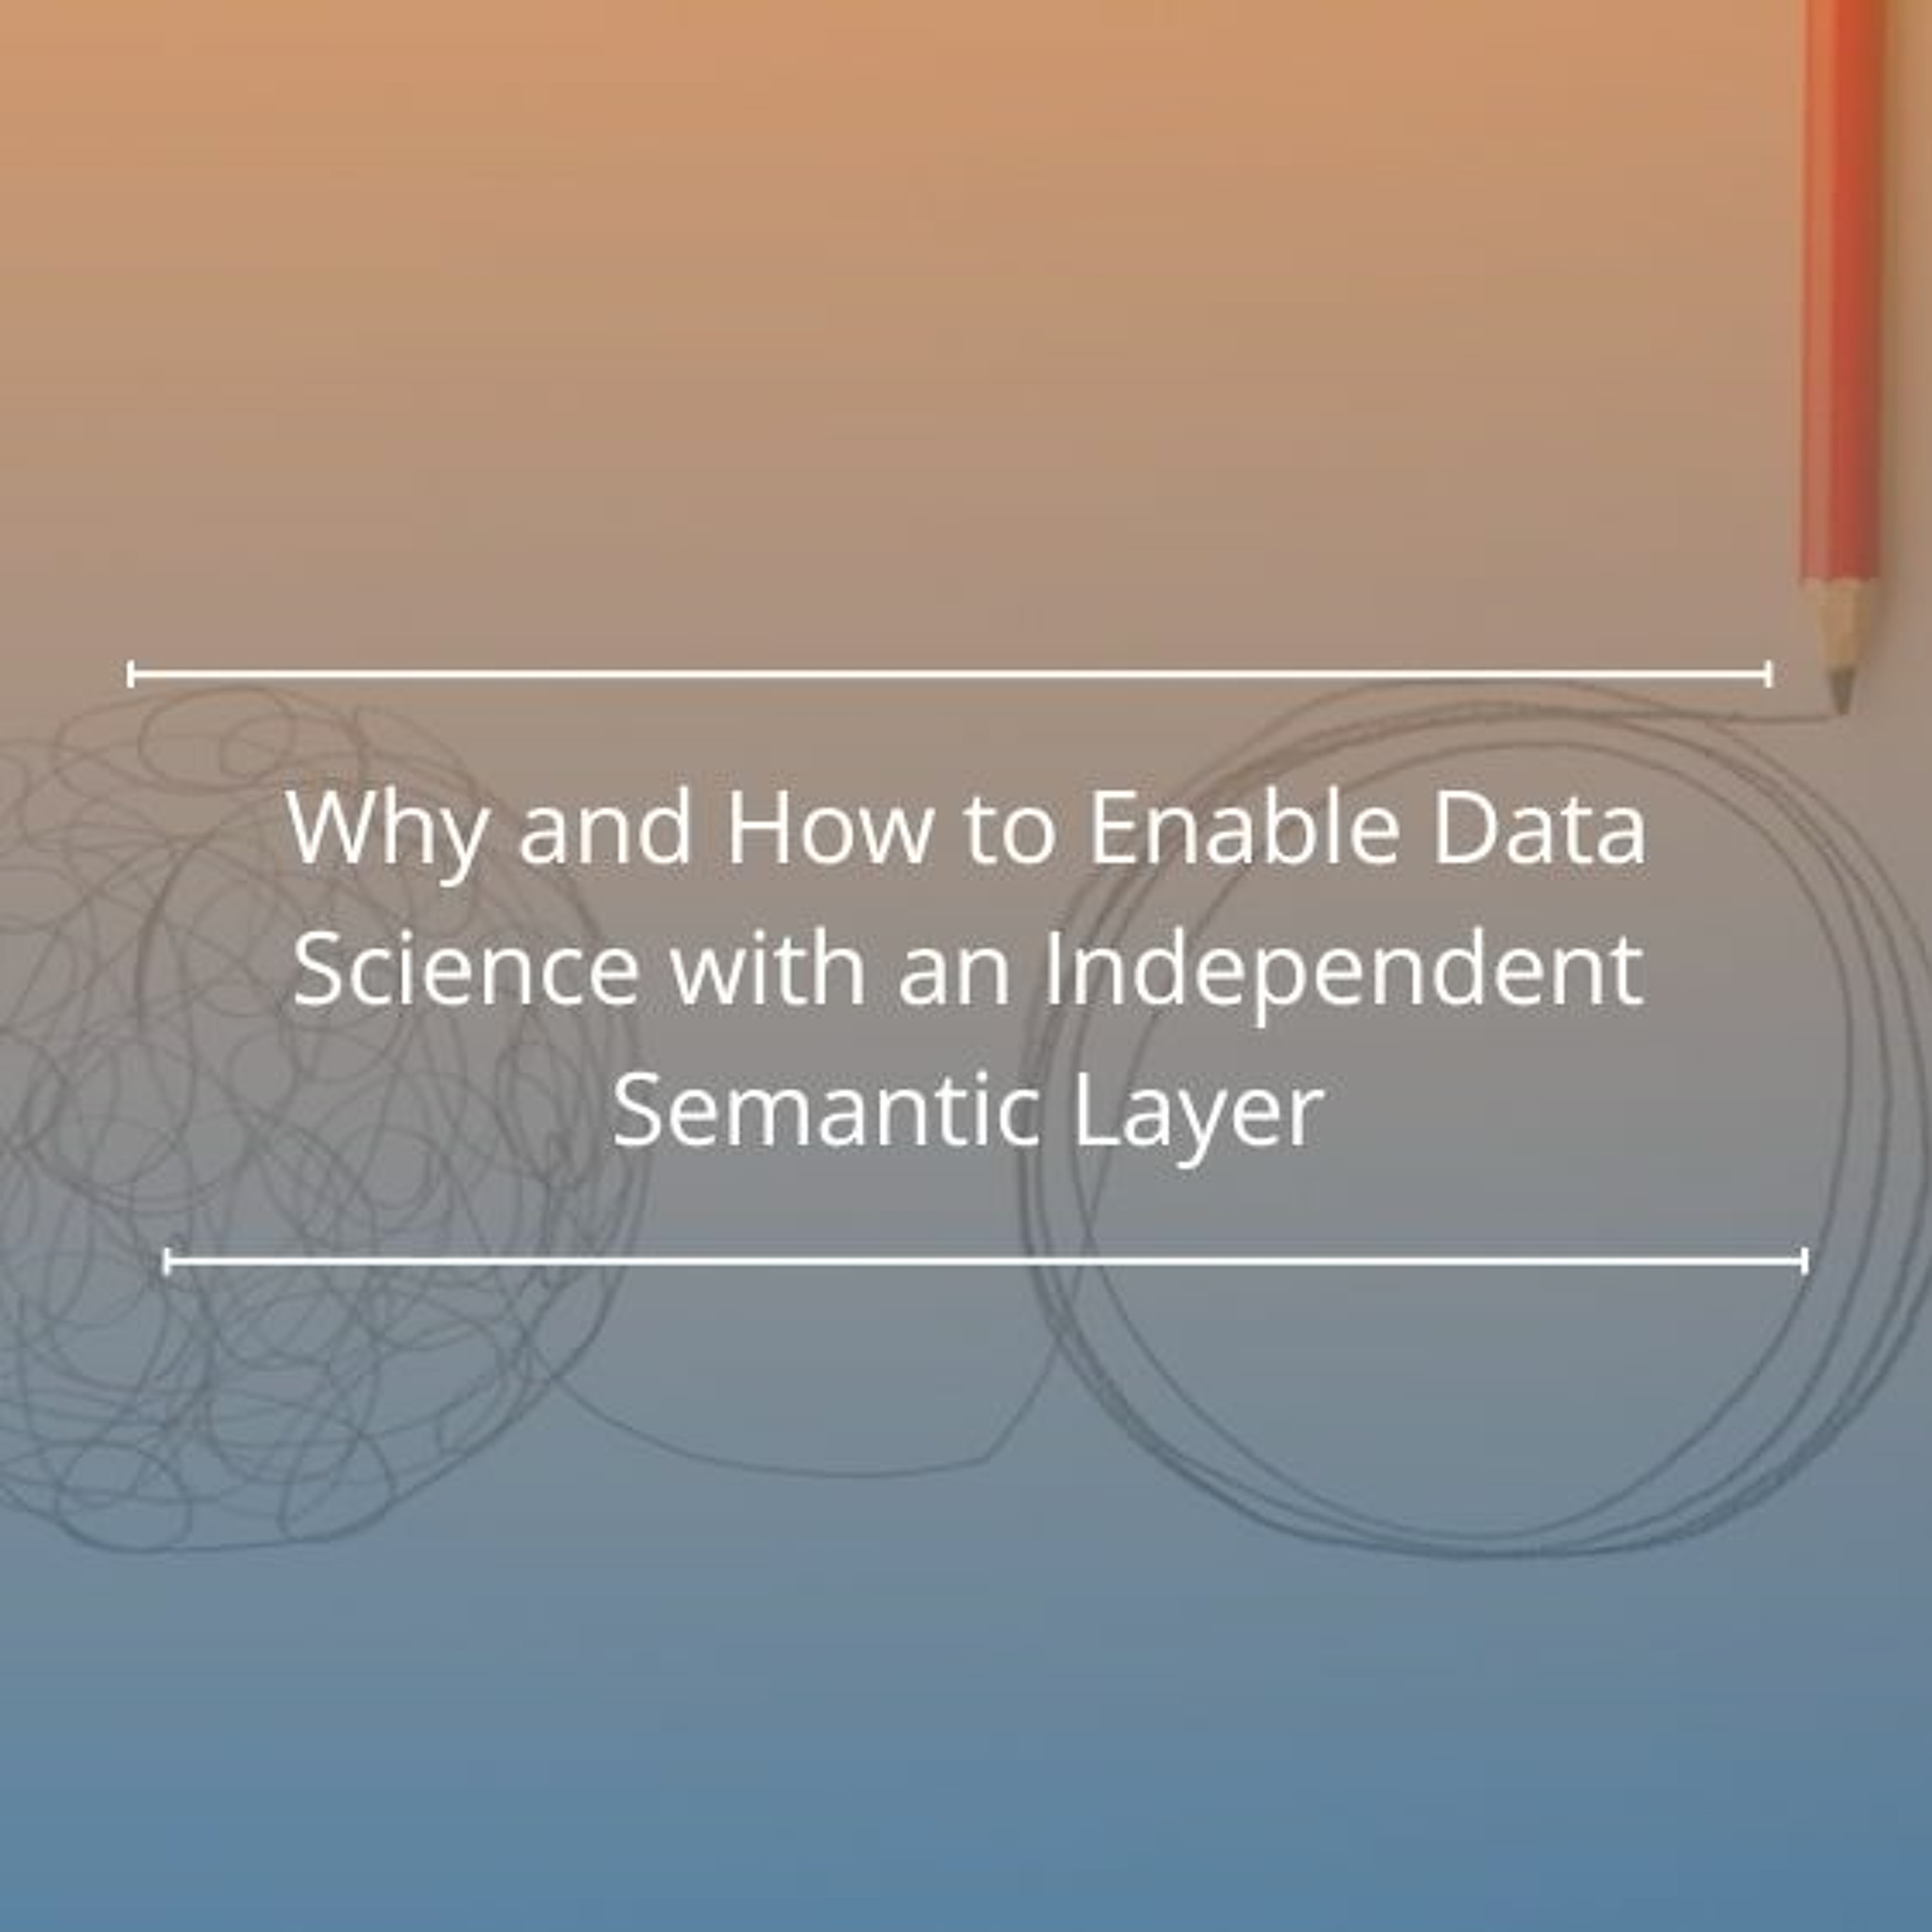 Why and How to Enable Data Science with an Independent Semantic Layer - Audio Blog